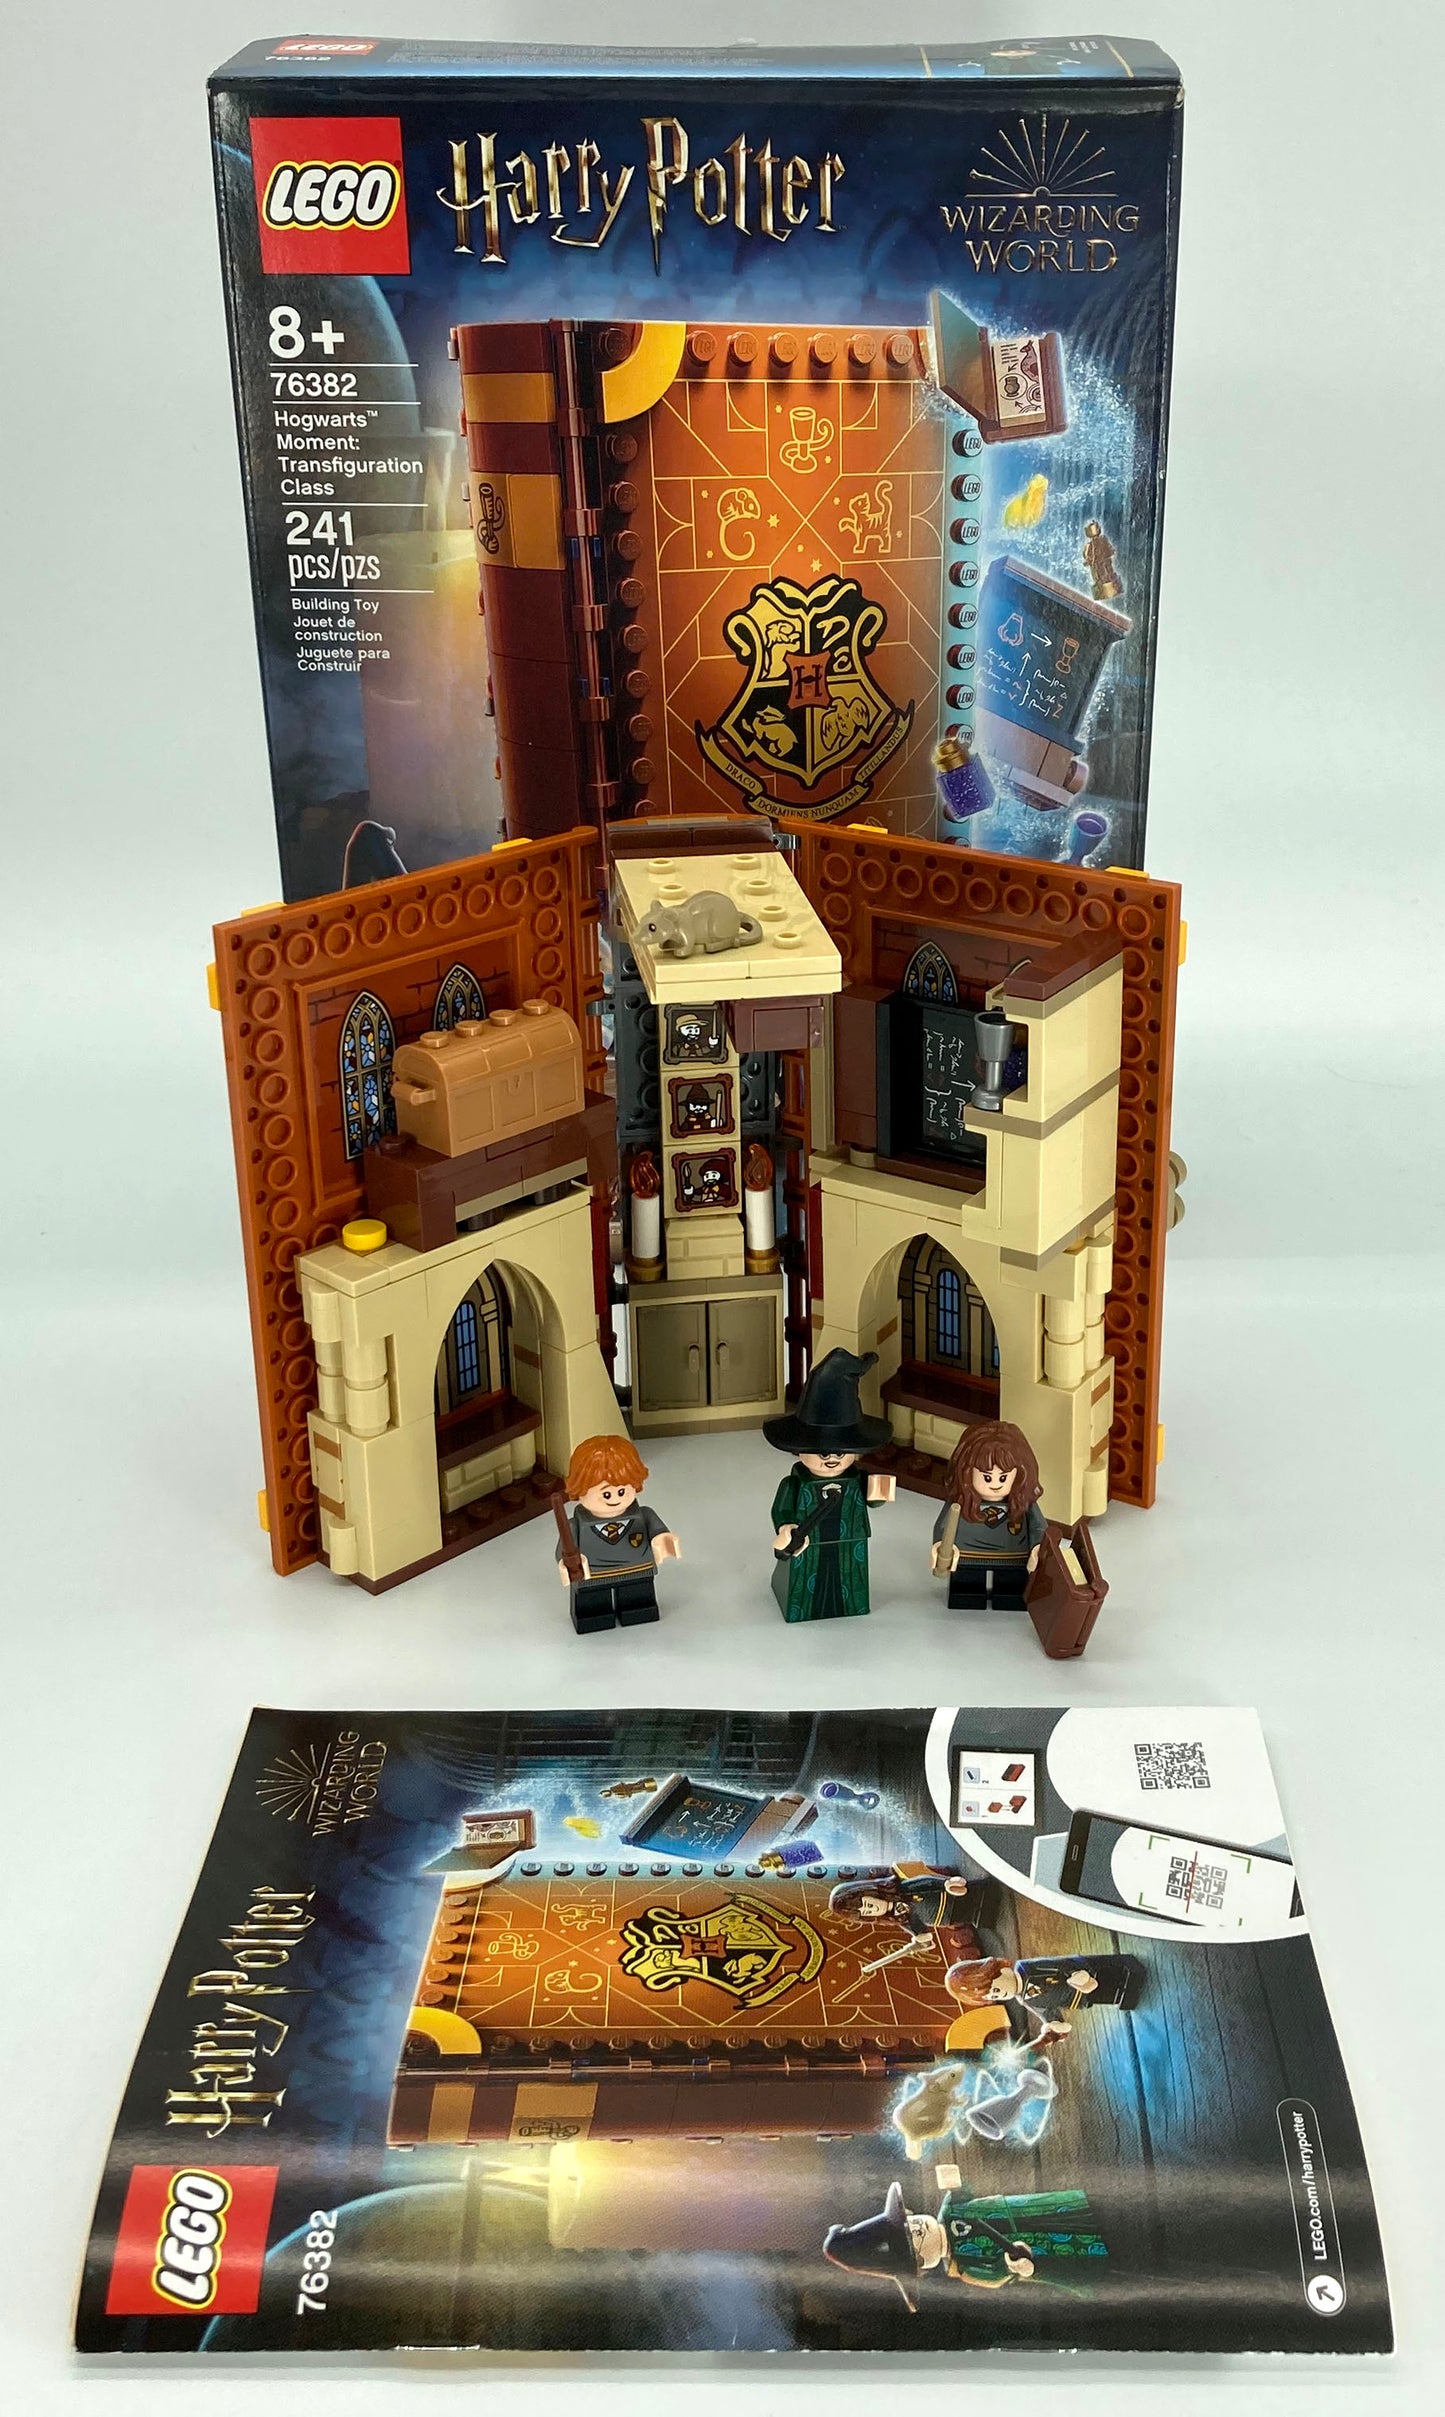 Used Set 76382 Hogwarts Moment Transfiguration Class (with Instruction Manual and Box)